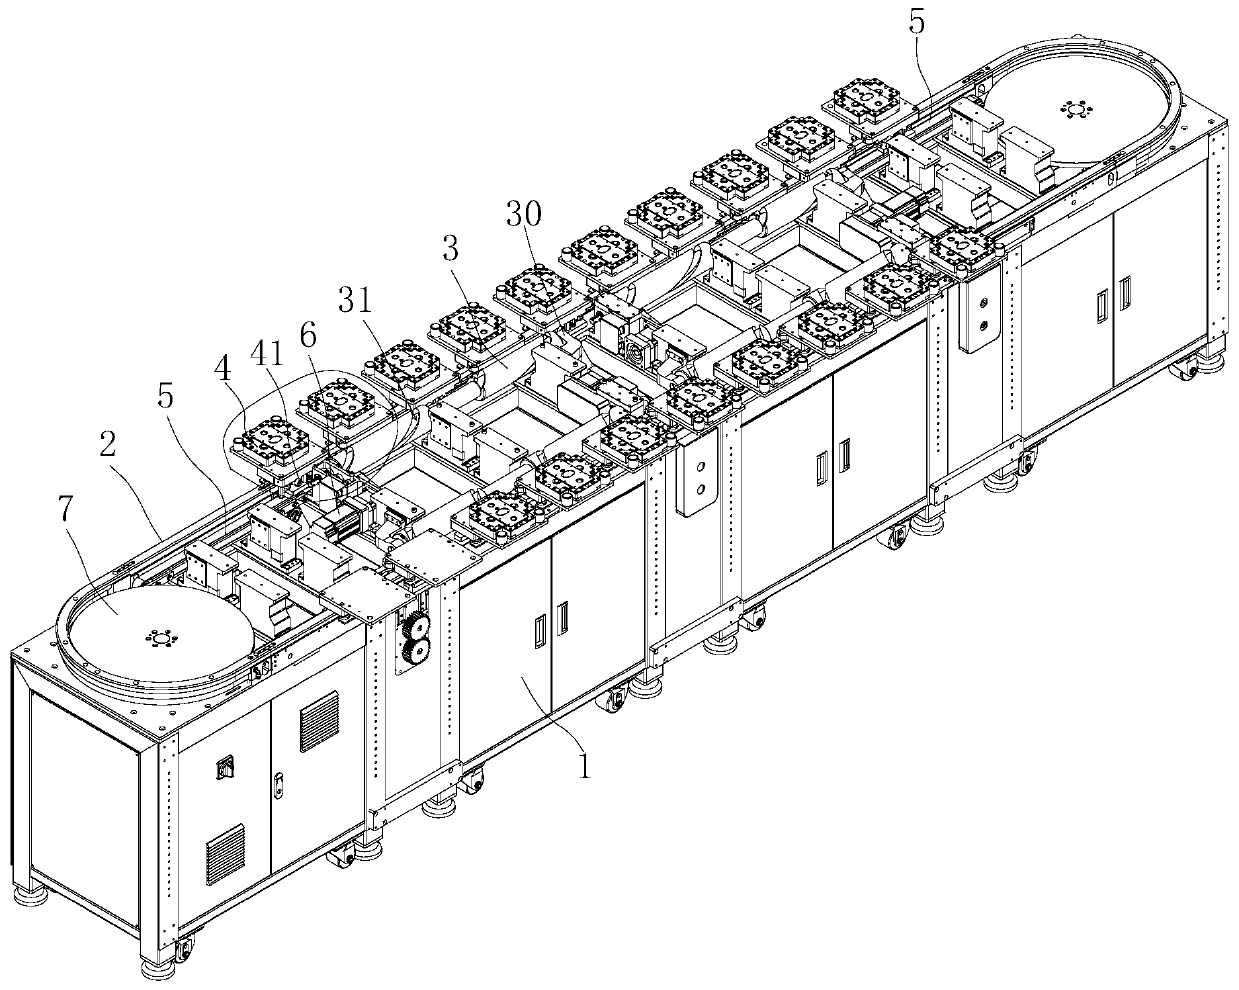 Rail-type conveying device